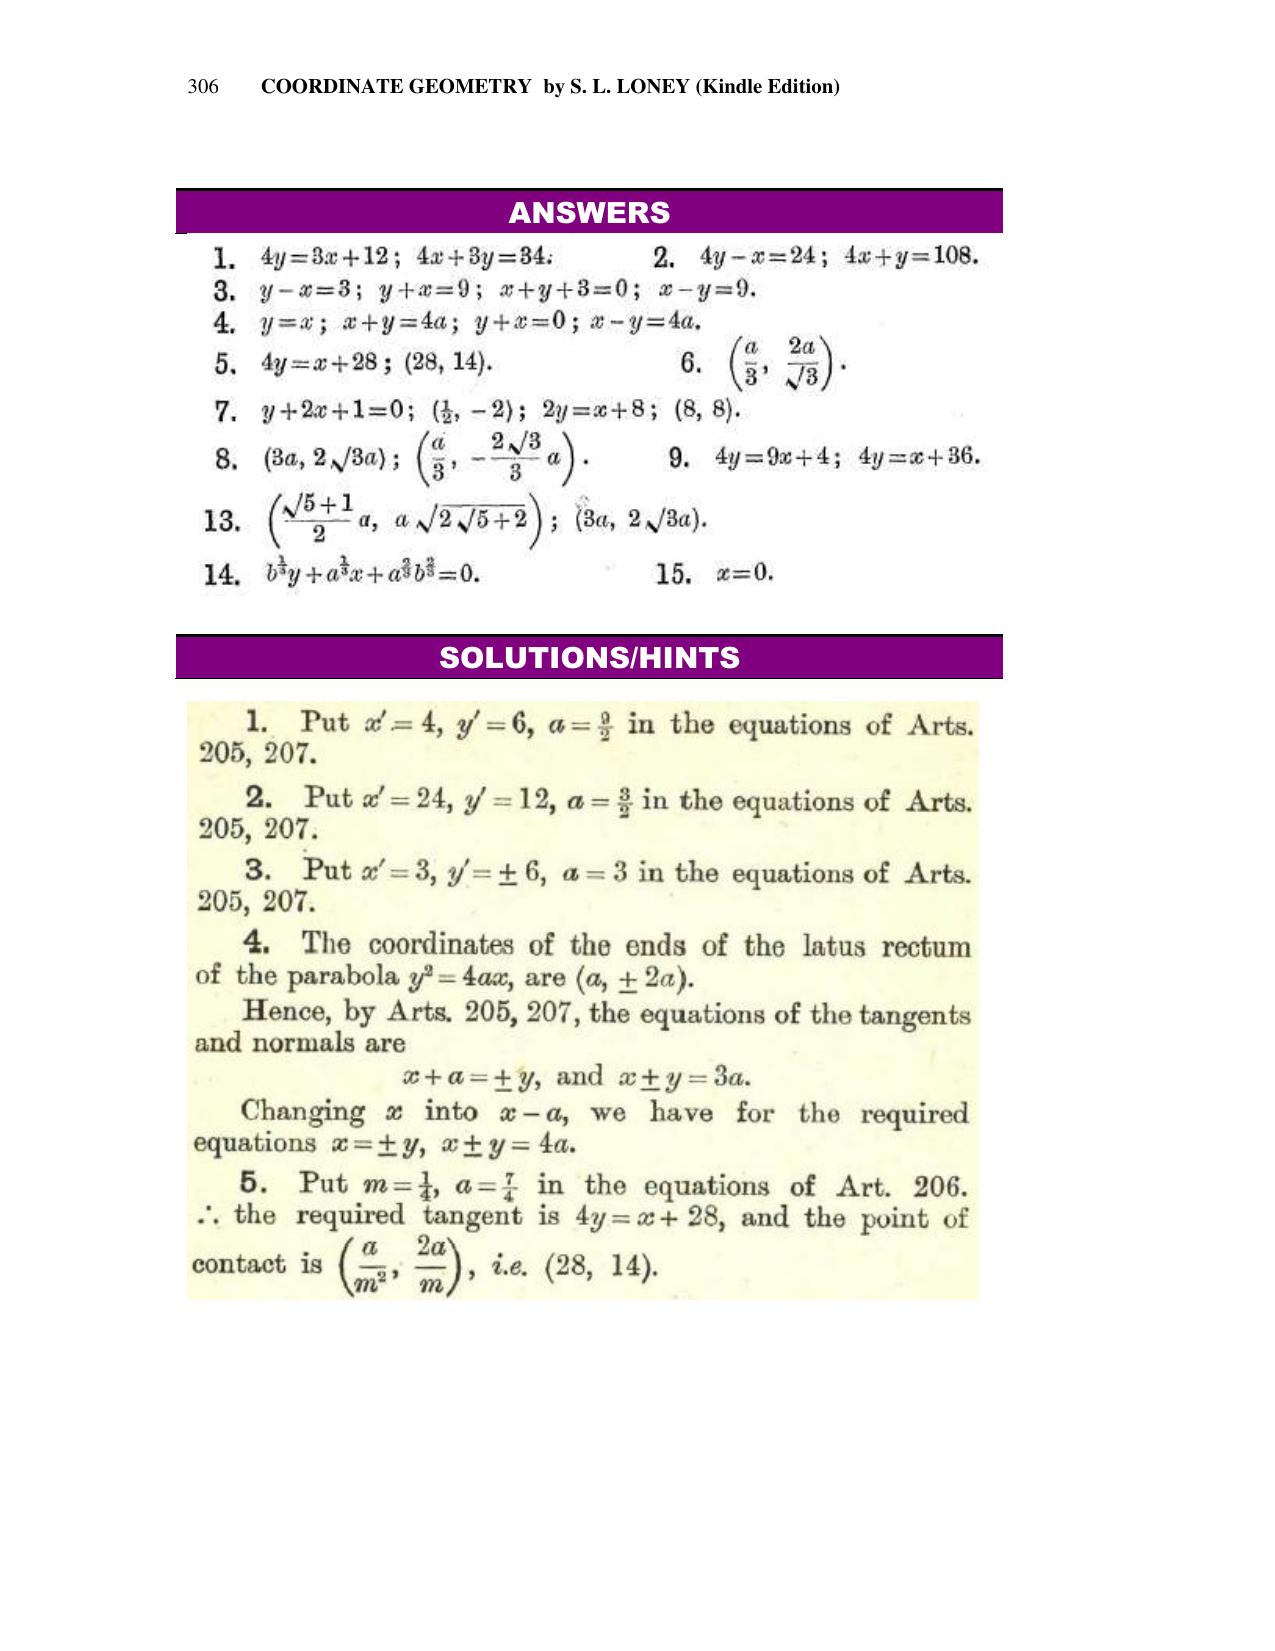 Chapter 10: The Parabola - SL Loney Solutions: The Elements of Coordinate Geometry - Page 20